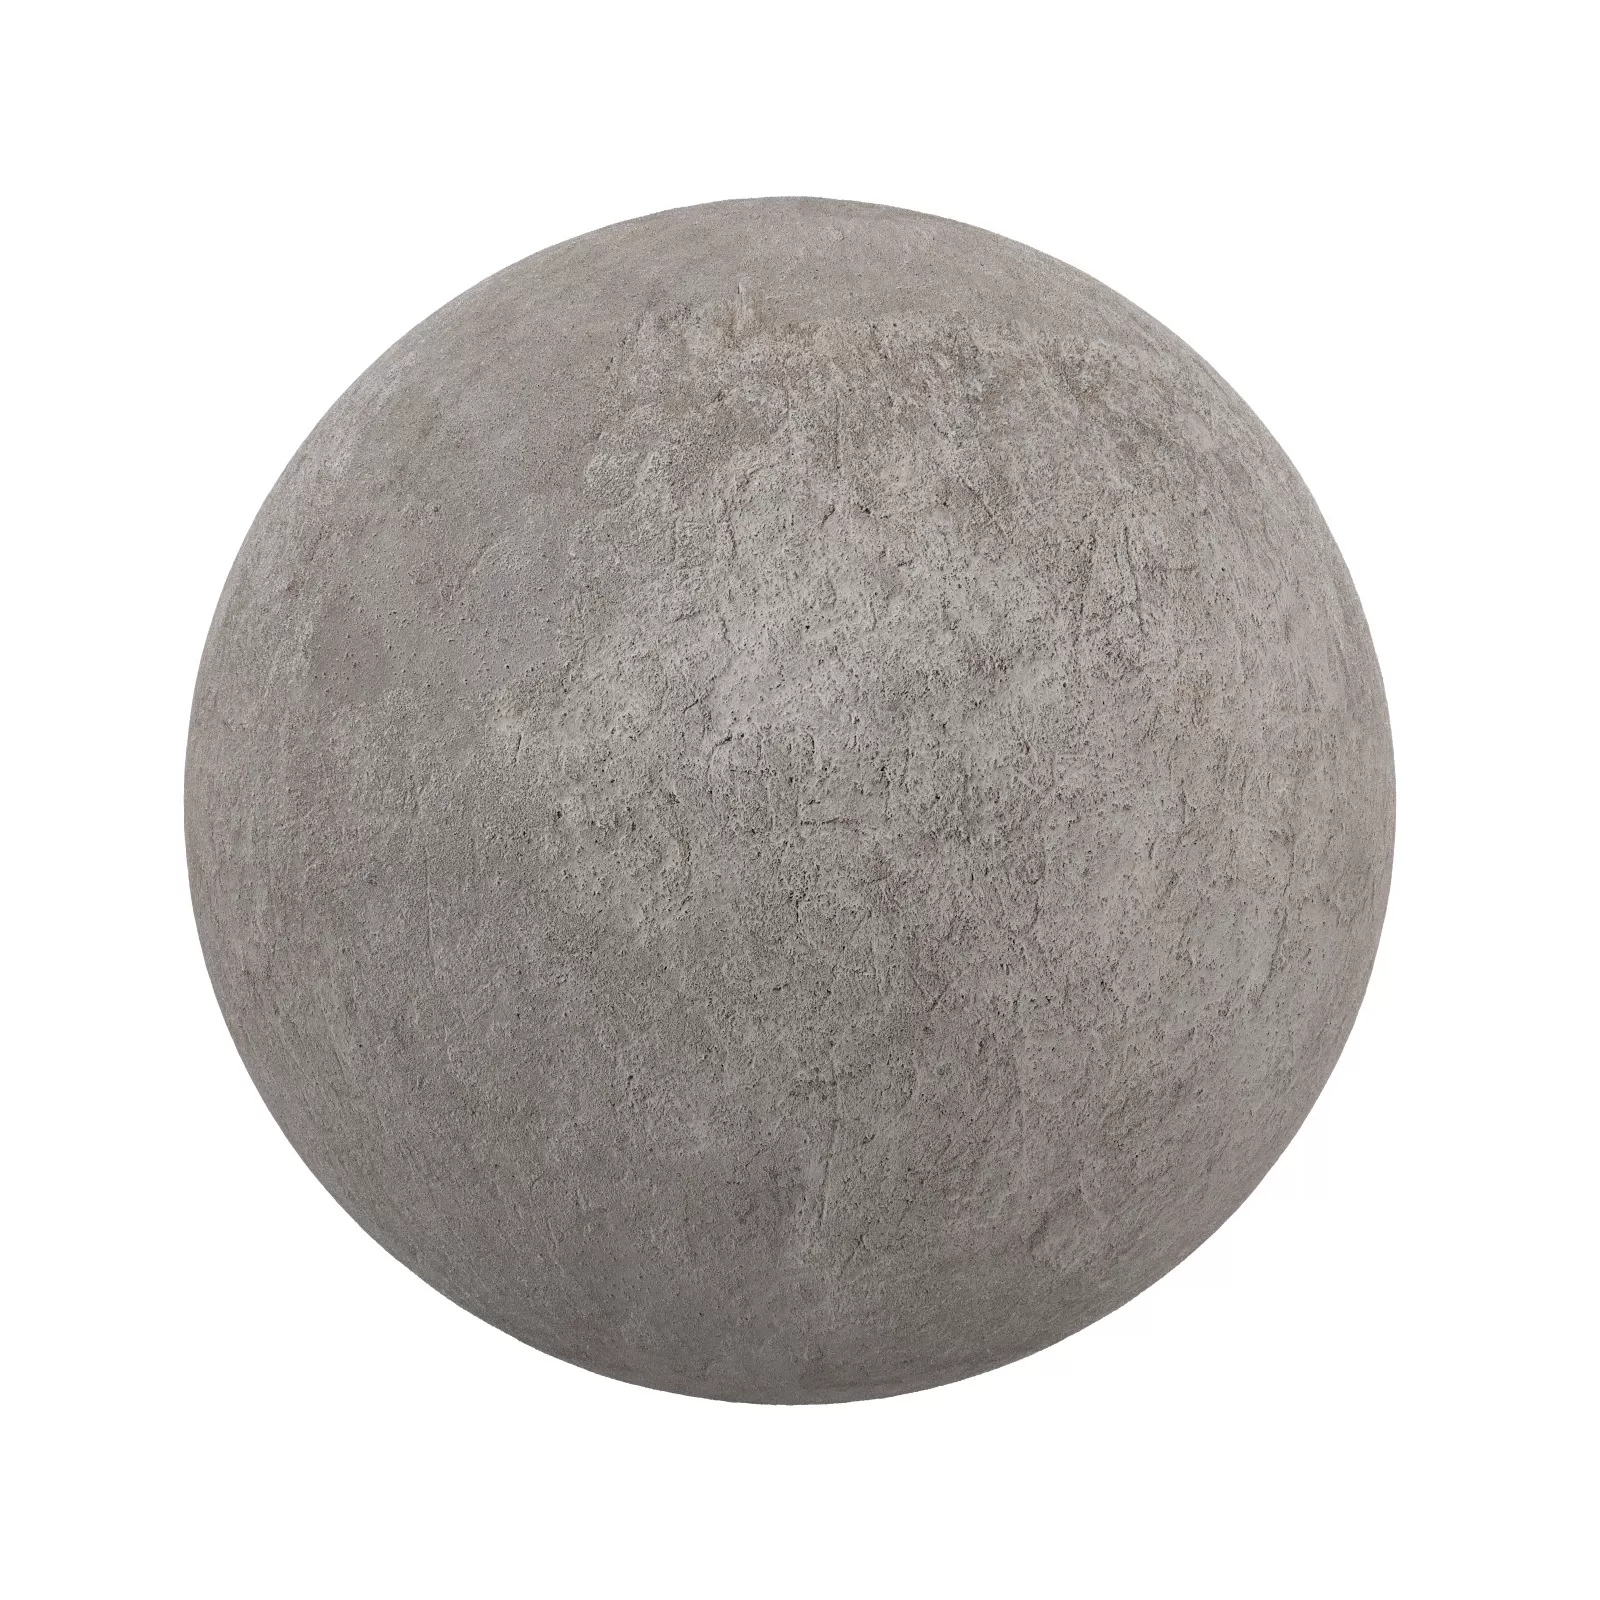 TEXTURES – STONES – CGAxis PBR Colection Vol 1 Stones – grey stone 8